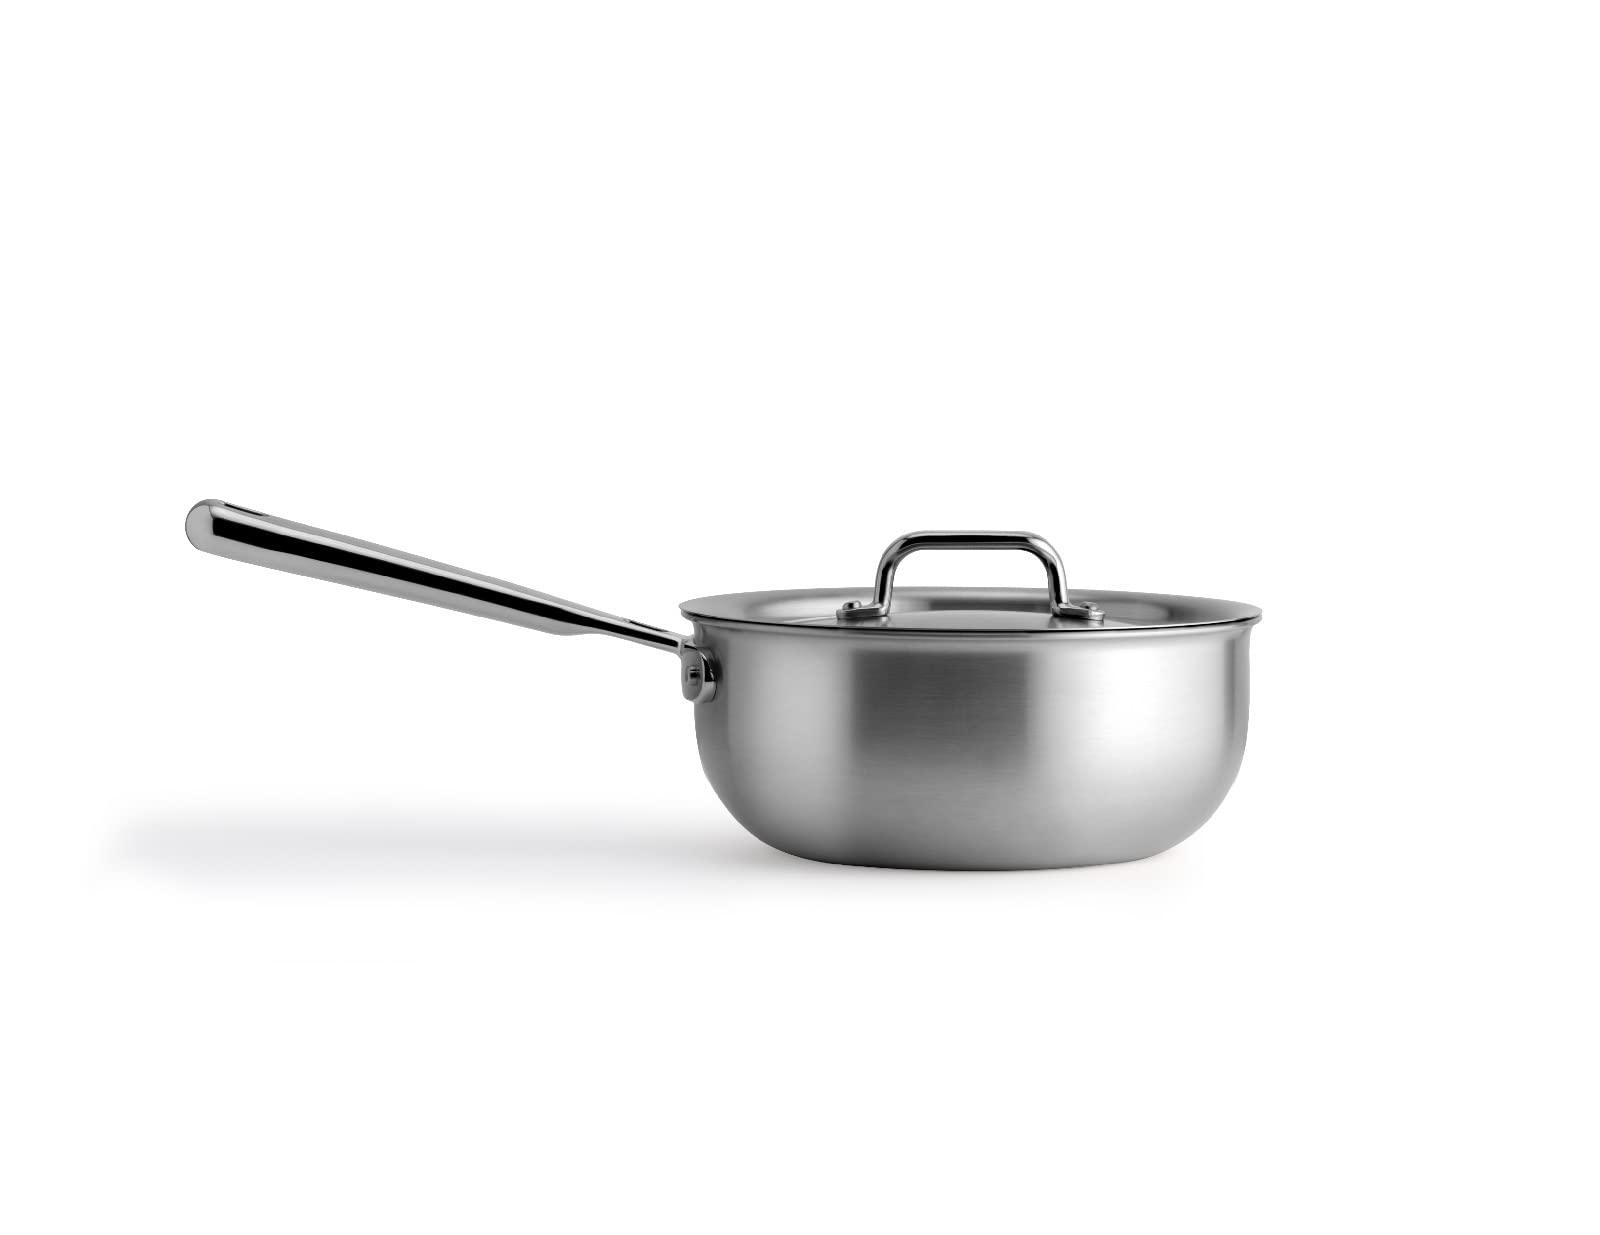 Misen Premium Saucier Pan with Lid & Stay Cool Handle - 5-Ply Stainless Steel Cookware - Gas, Electric & Induction Cooking, Thick Bottom, Nonstick Interior, Heats Evenly - 3 Quarts - CookCave